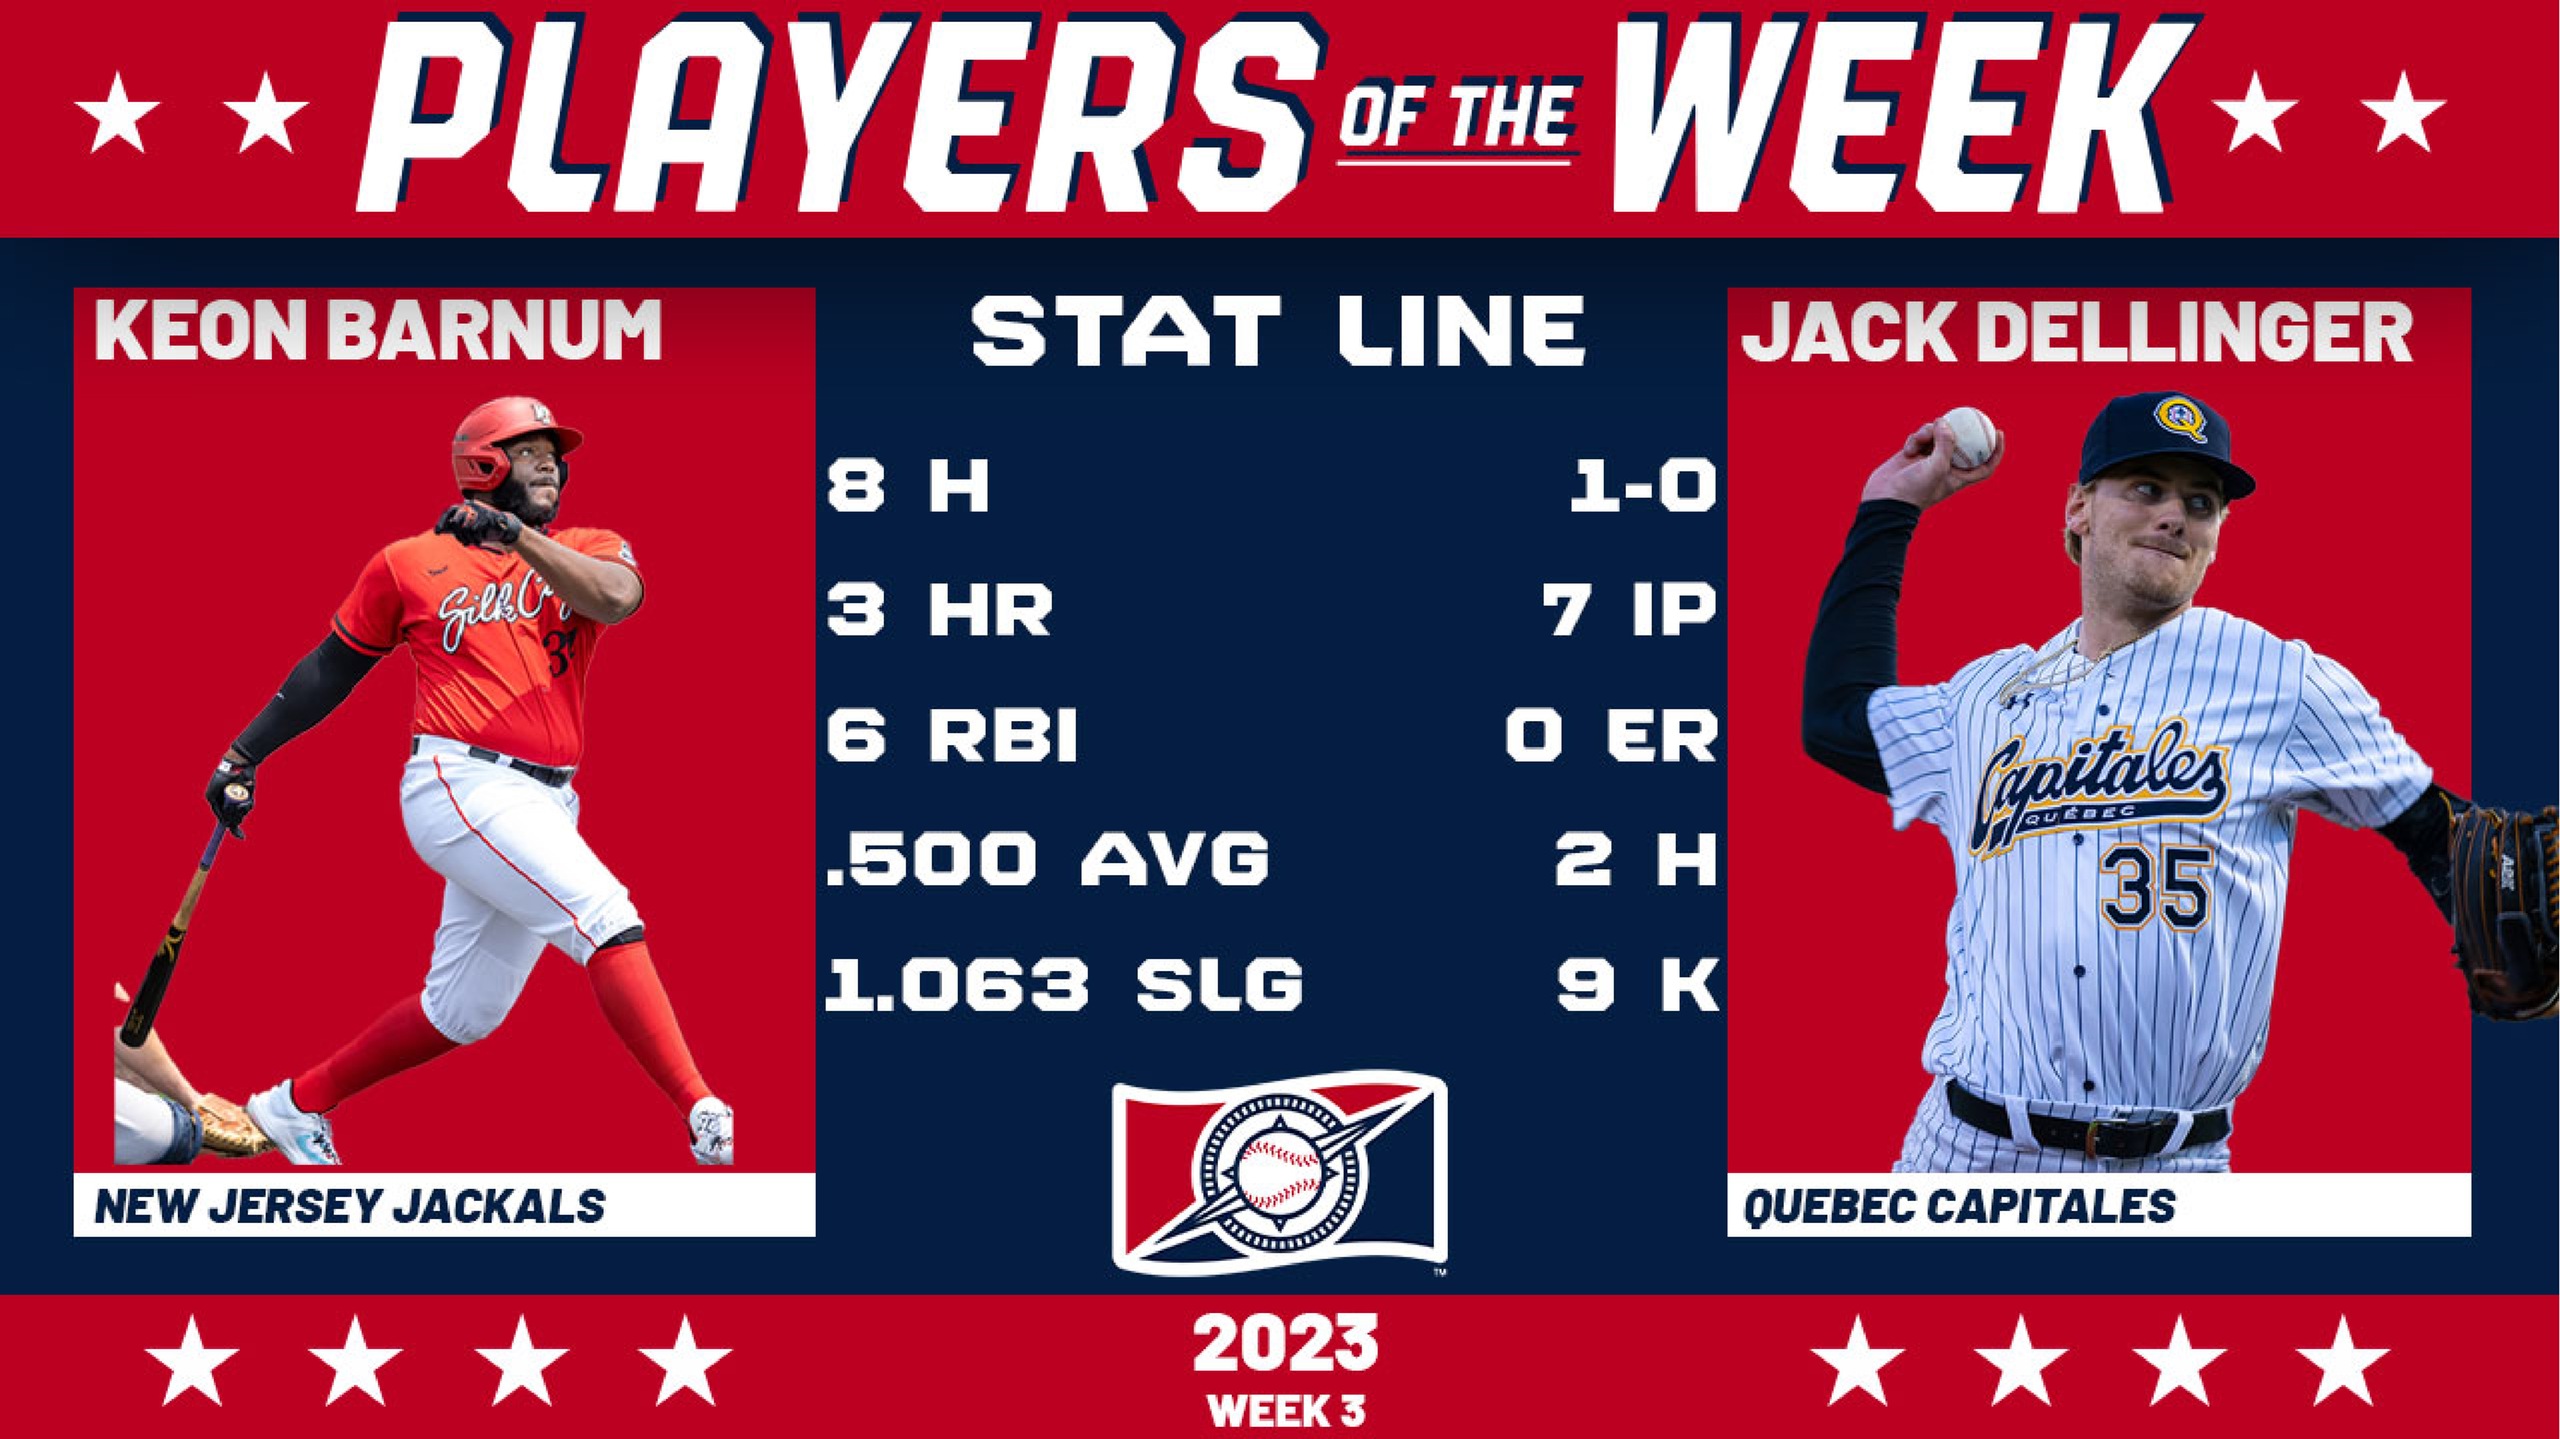 JACKALS BARNUM PICKS UP PLAYER OF THE WEEK, CAPITALES DELLINGER WINS PITCHER OF THE WEEK.